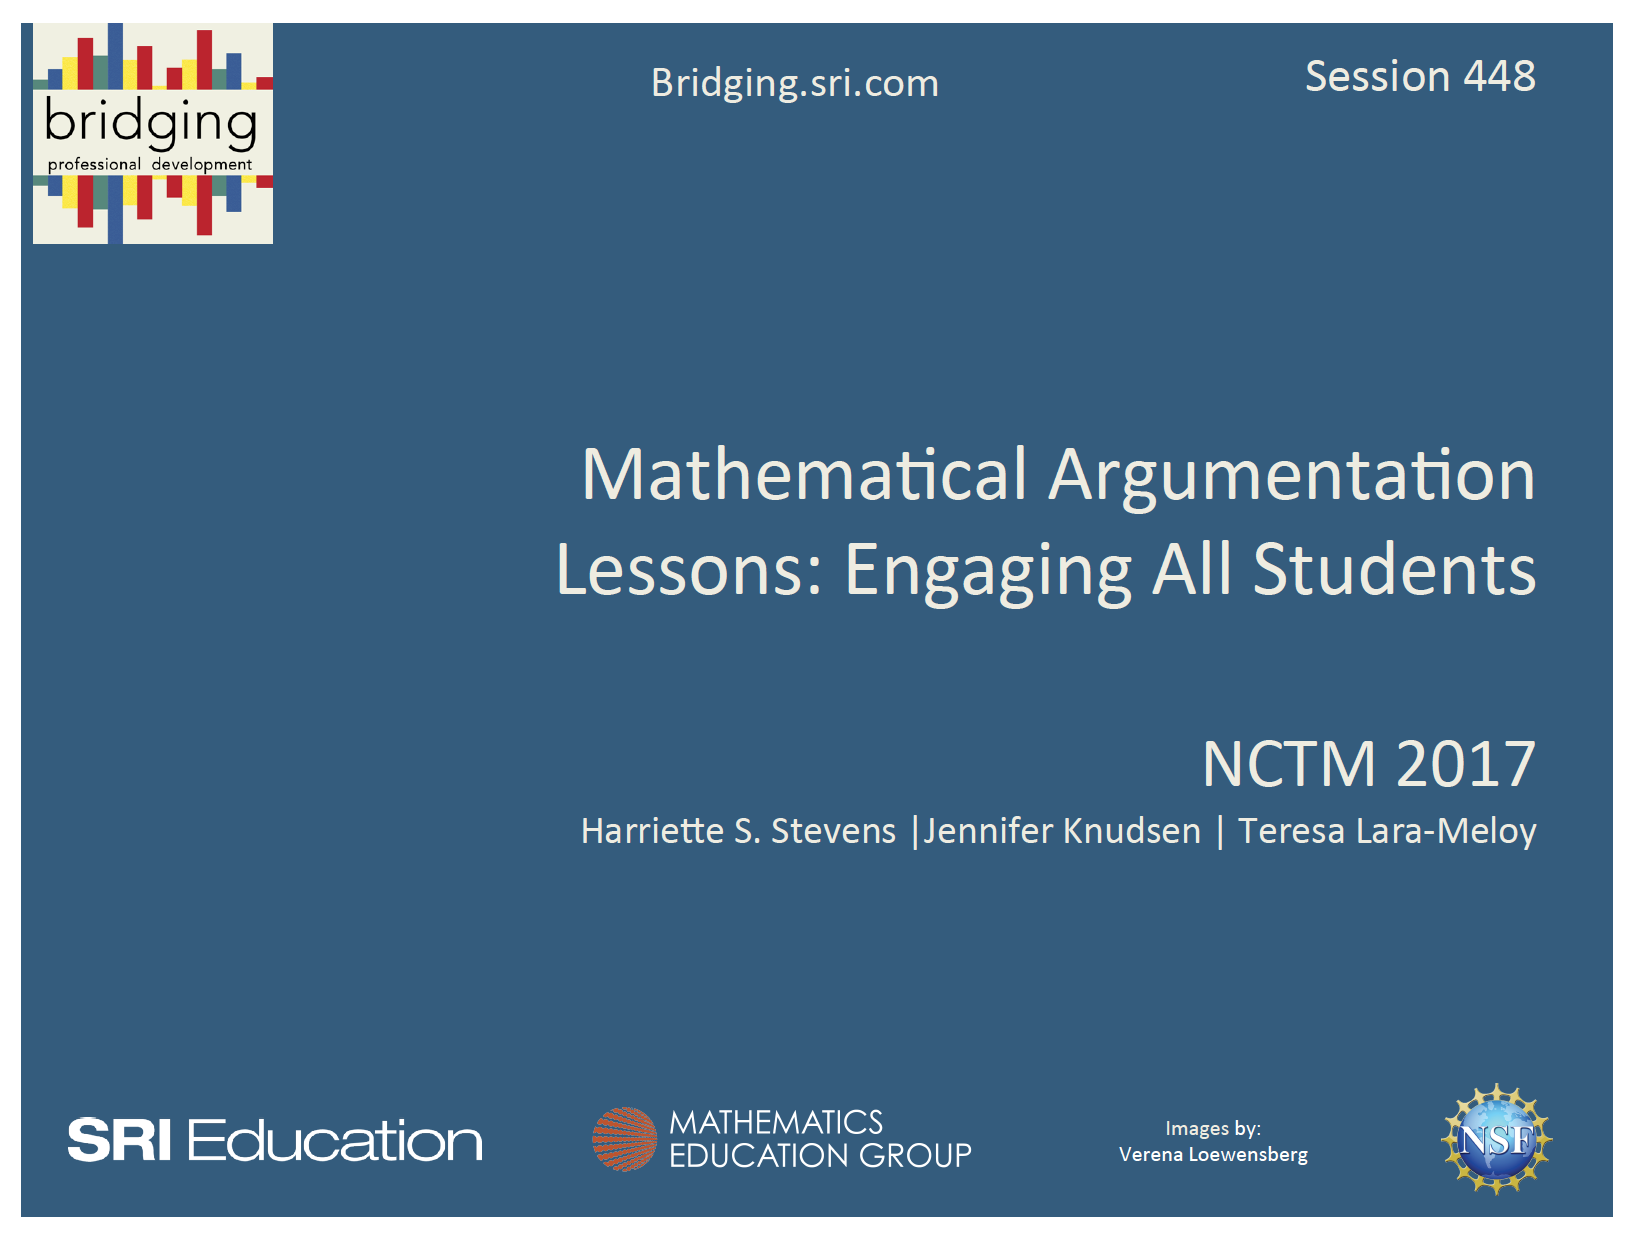 Mathematical Argumentation Lessons: Engaging All Students presentation cover